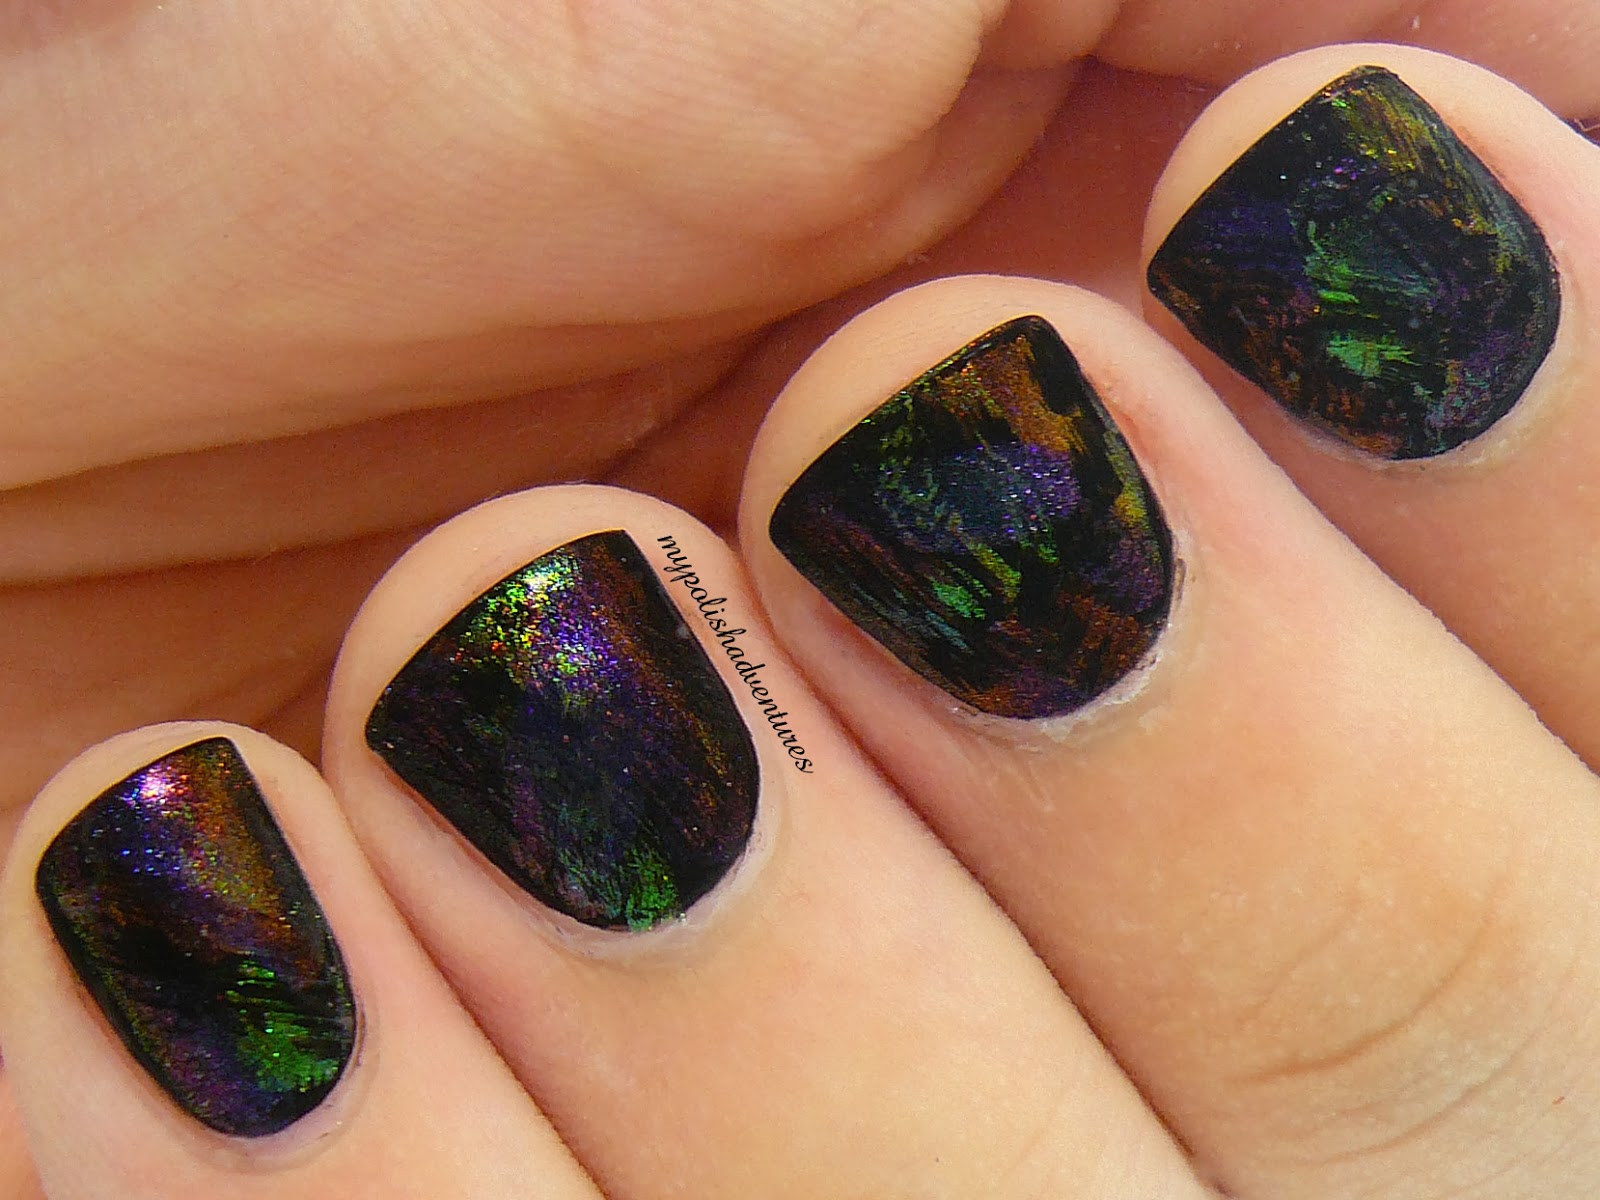 2. How to Create an "Oil Spill" Effect on Your Nails - wide 2